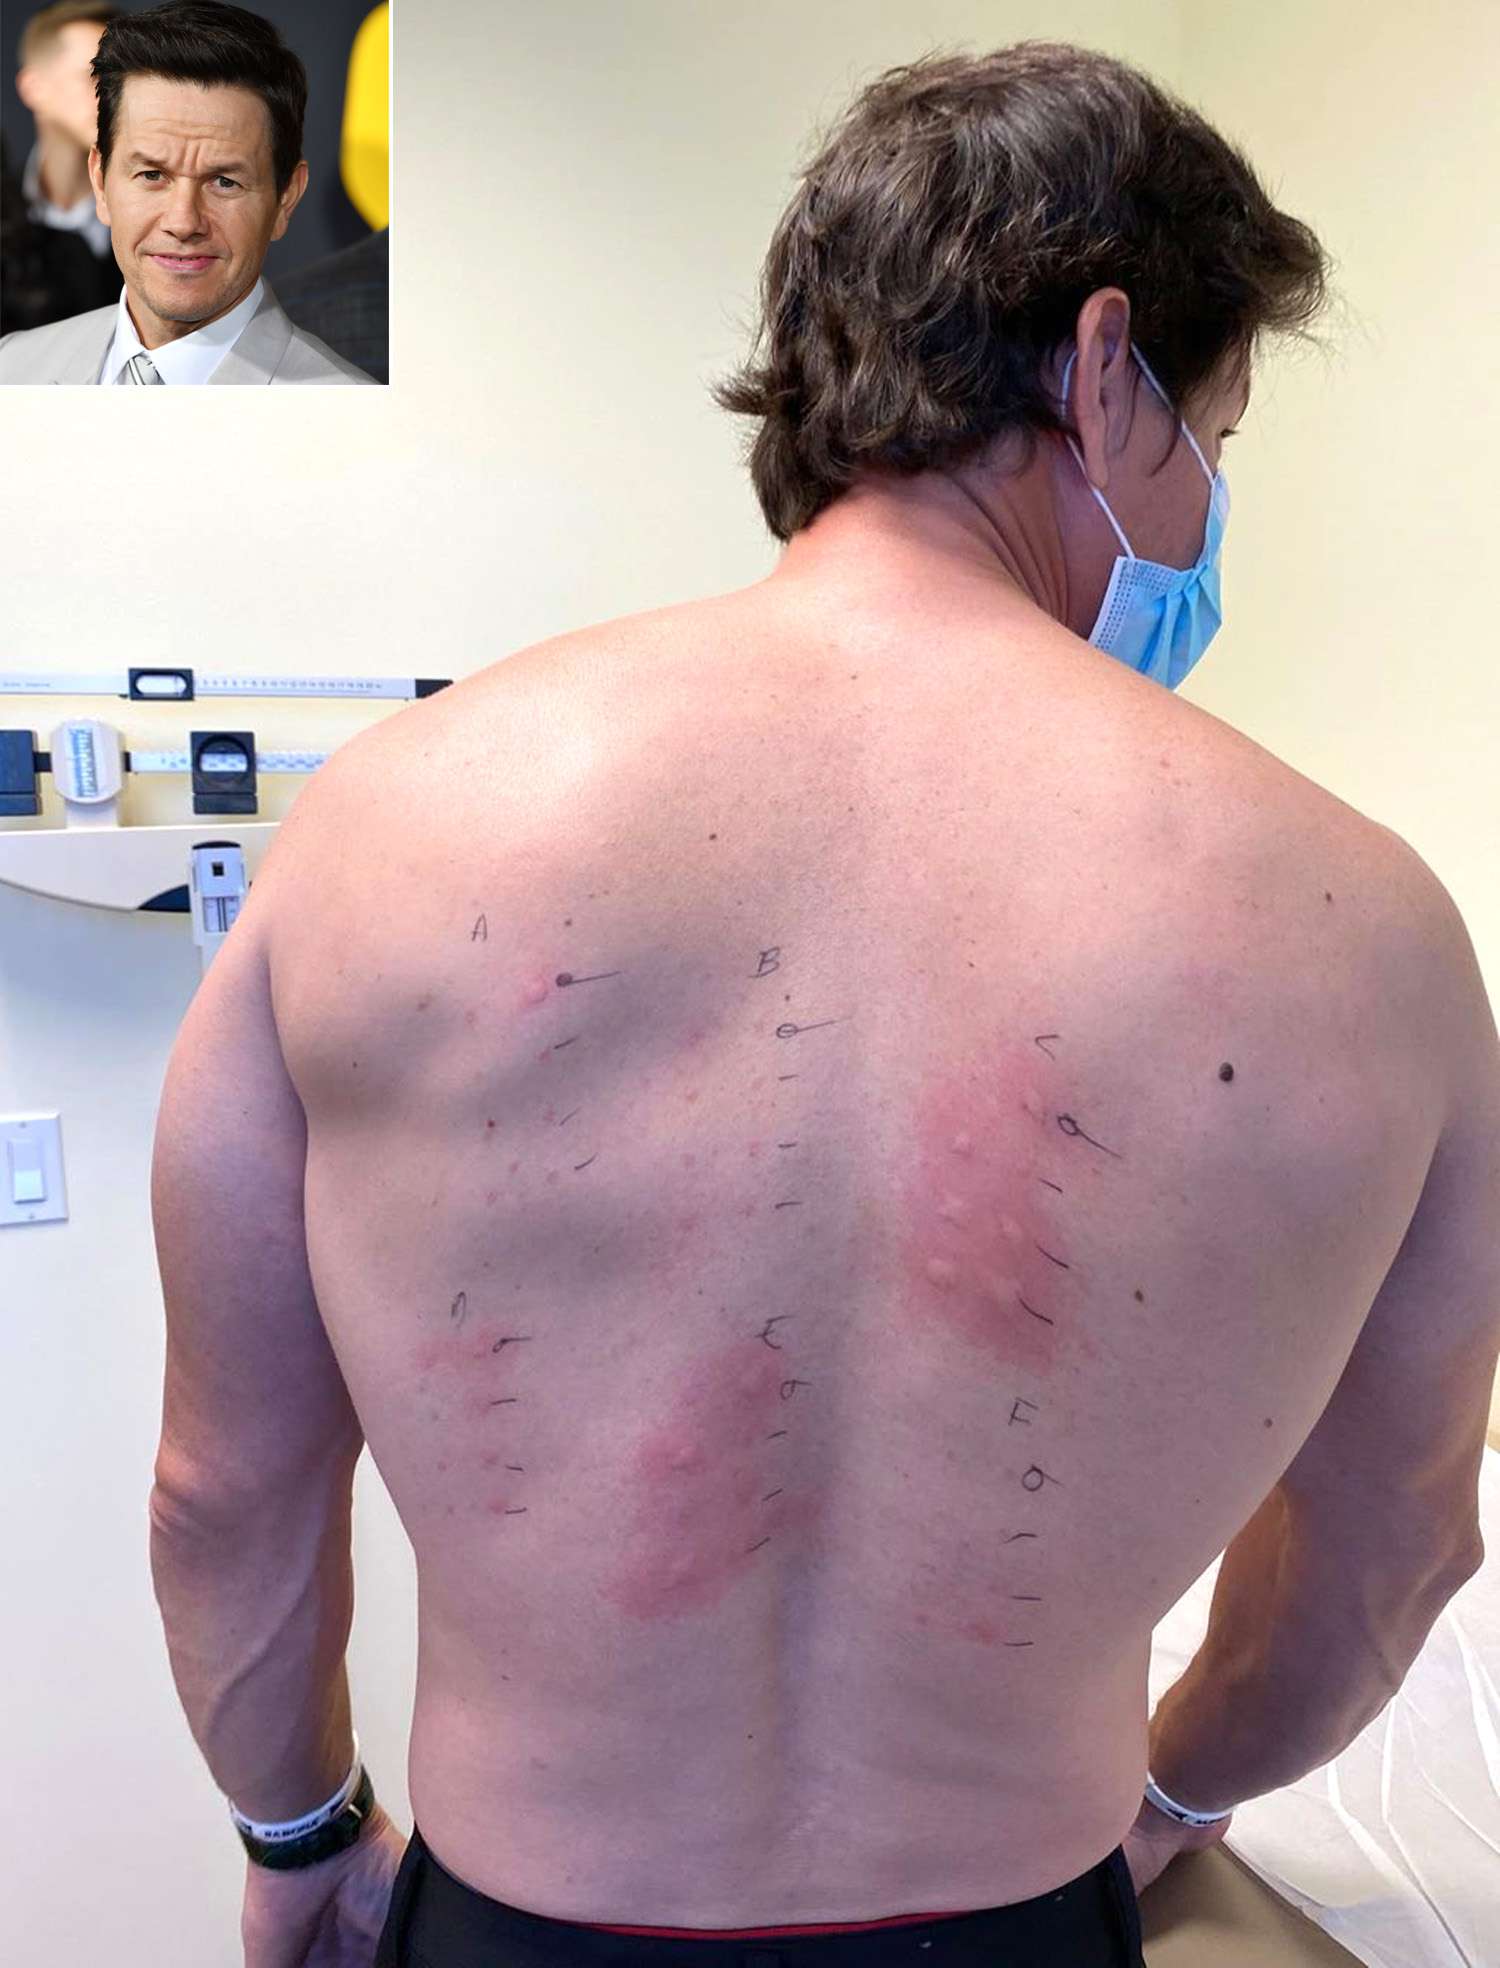 Mark Wahlberg Shares Allergy Test Results After Learning He's 'Allergic to Almost Everything' - PEOPLE